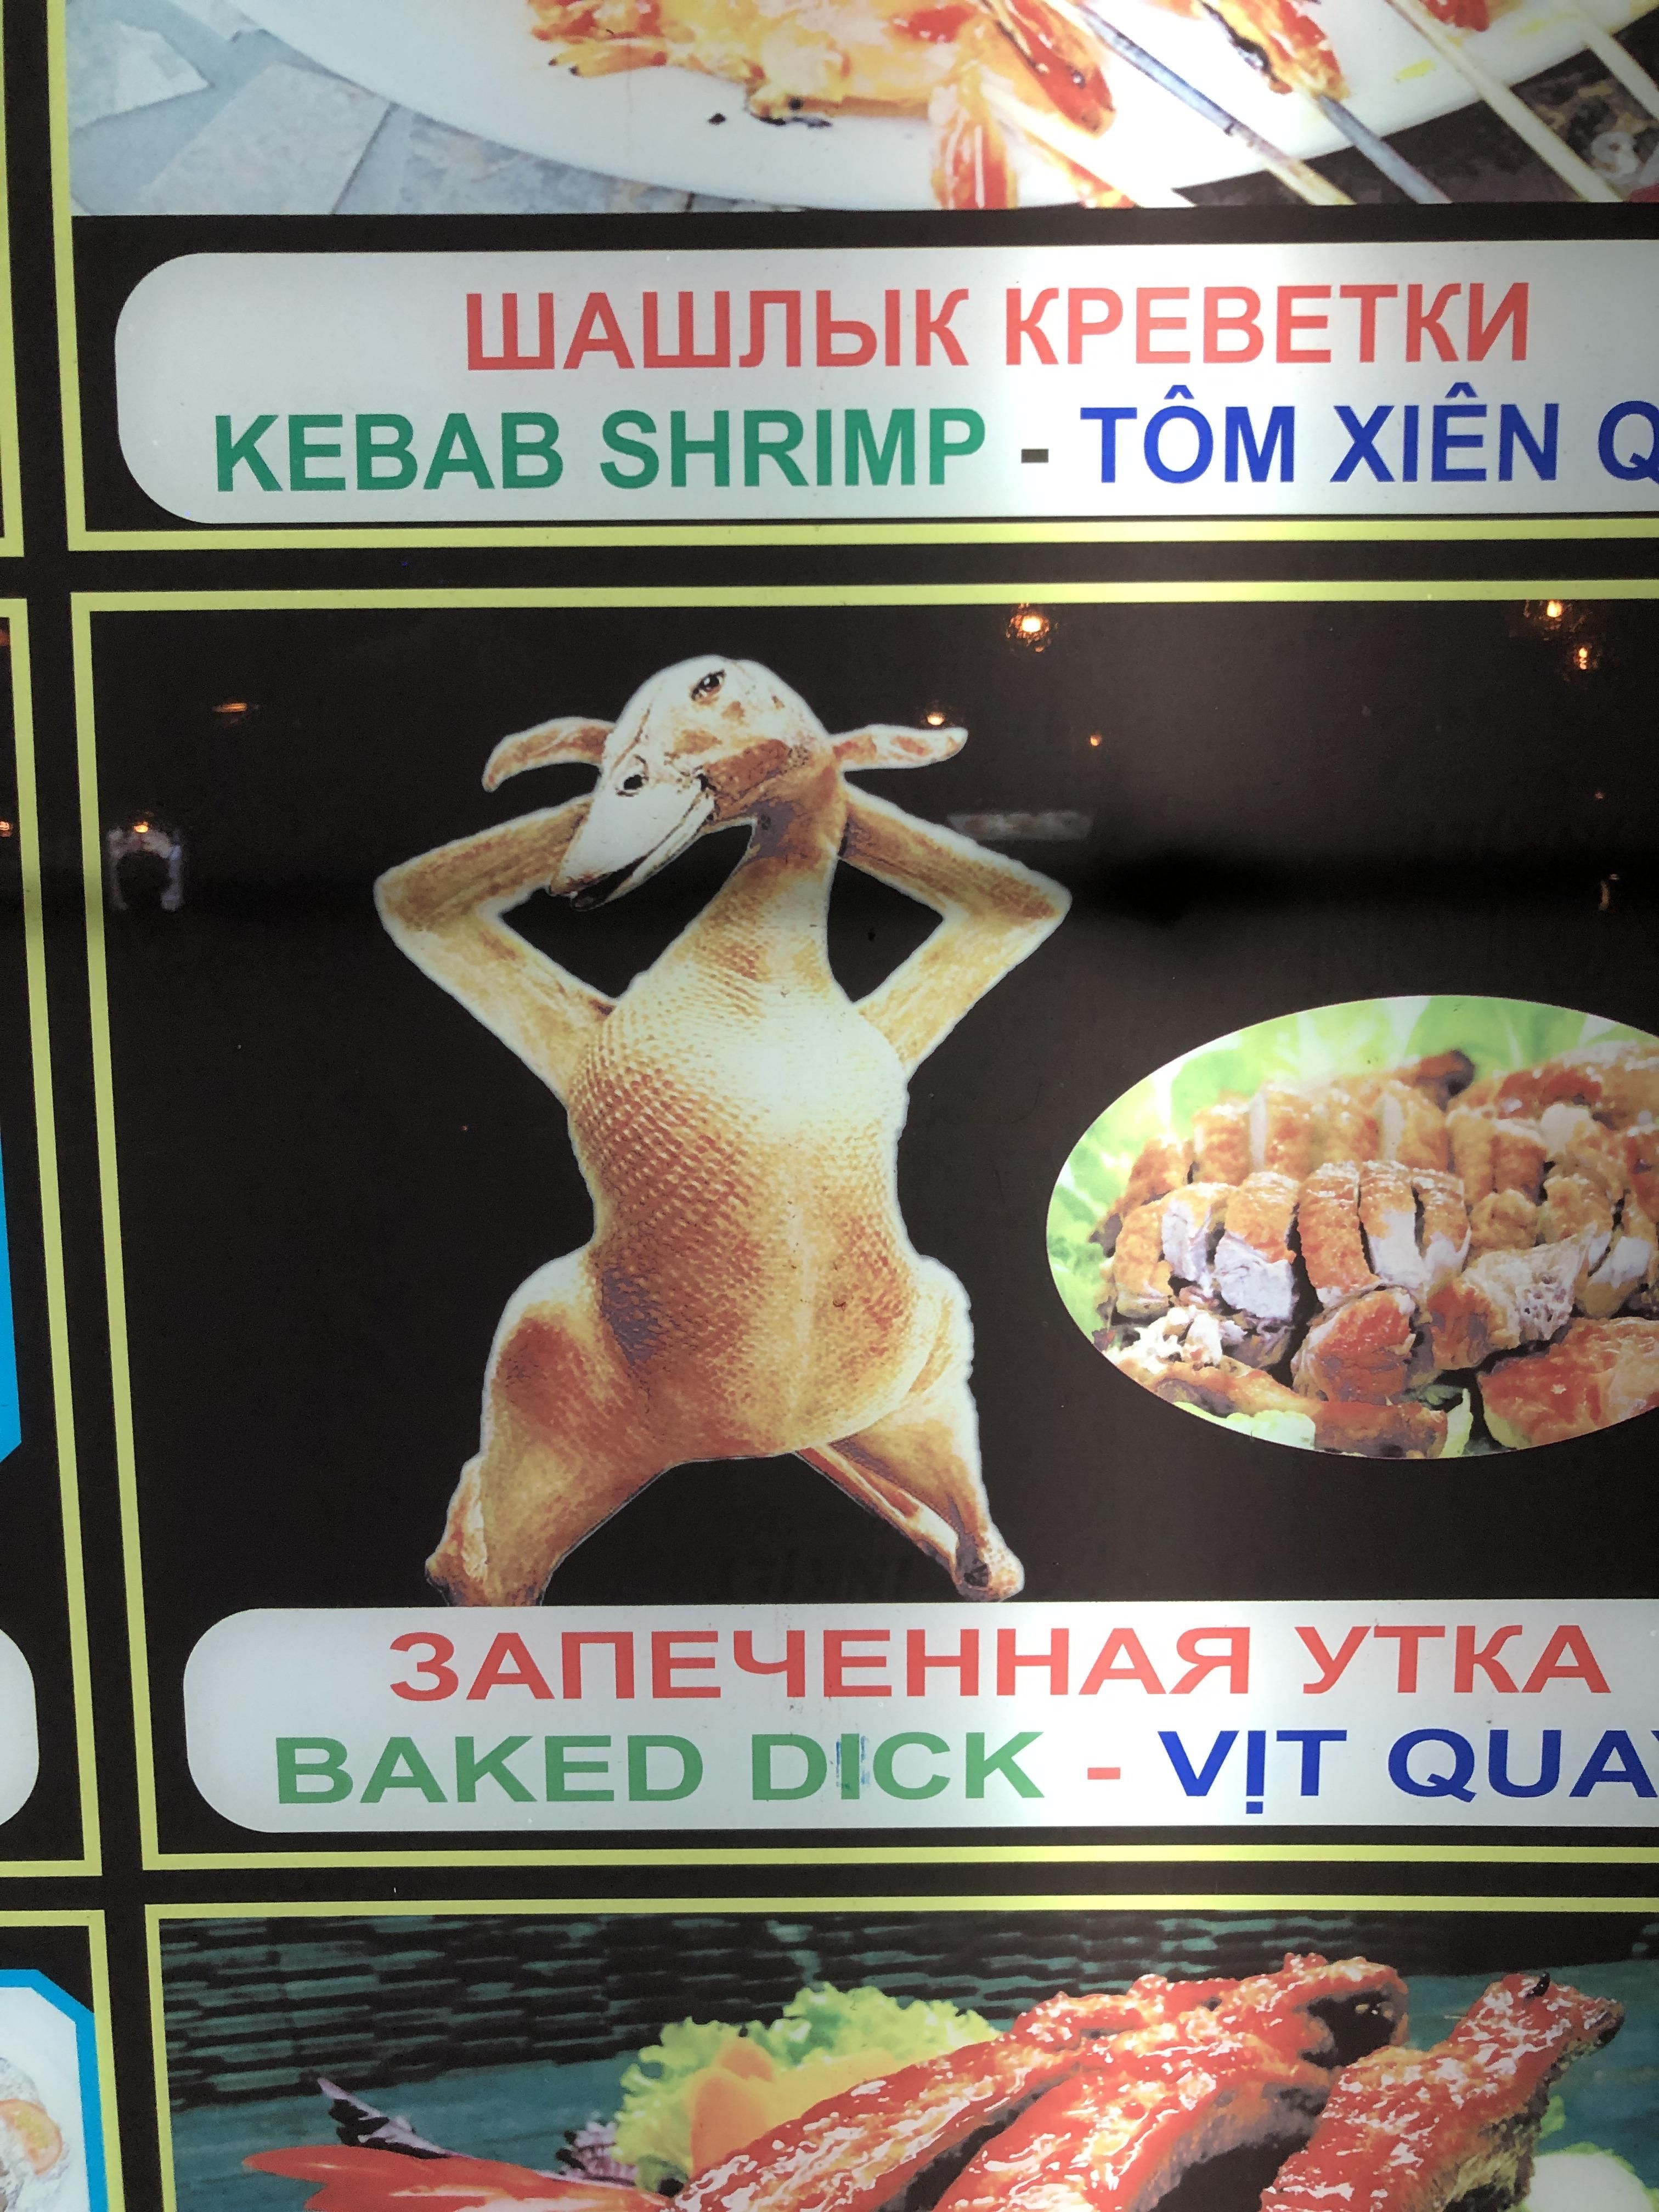 This seductive duck I found on a menu in Vietnam, complete with an excellent typo